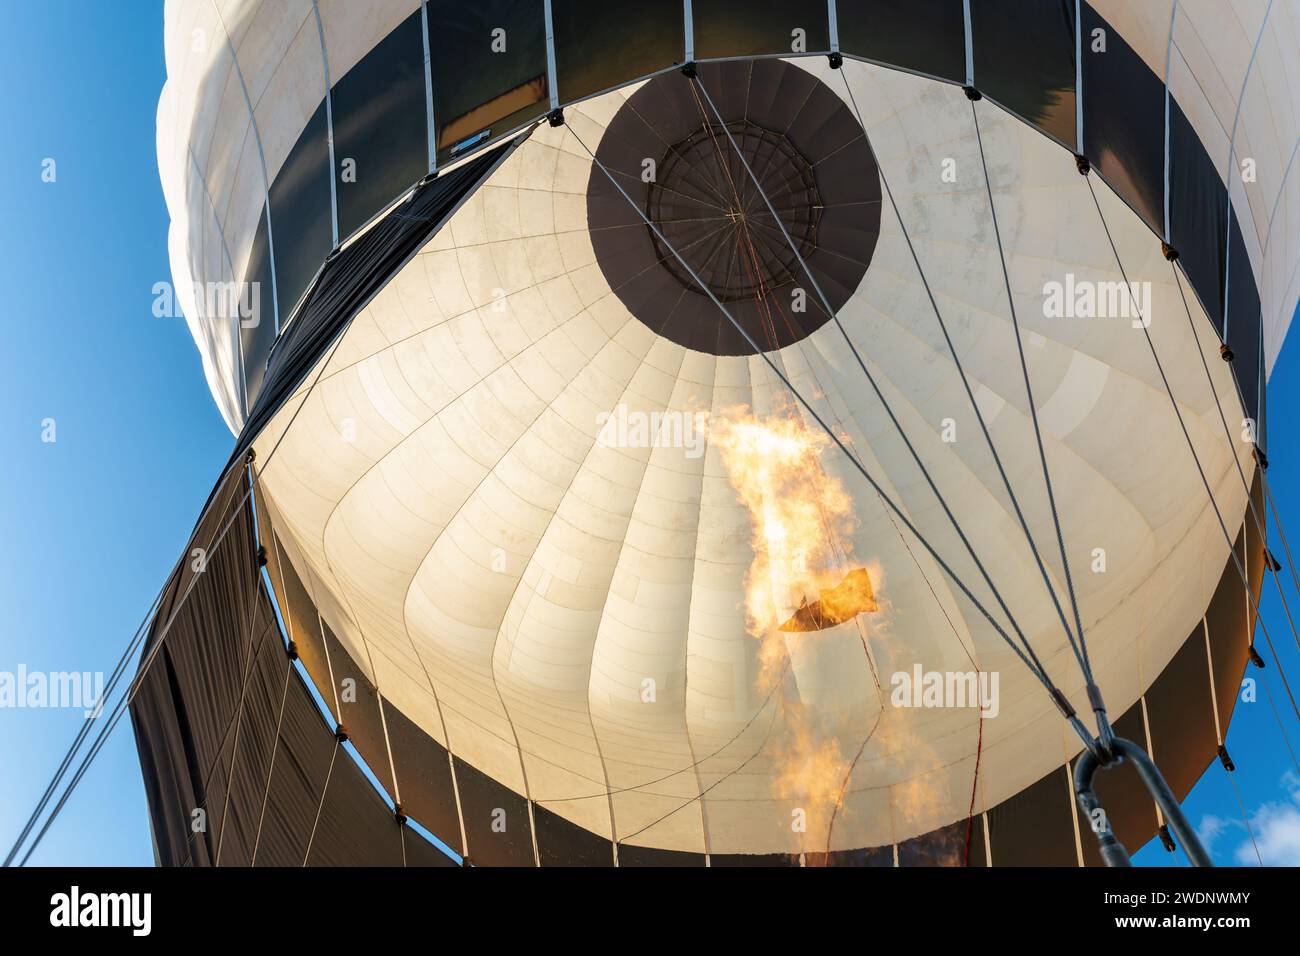 A view from below to the inside of the white, hot air balloon dome. Horizontal photo. Stock Photo